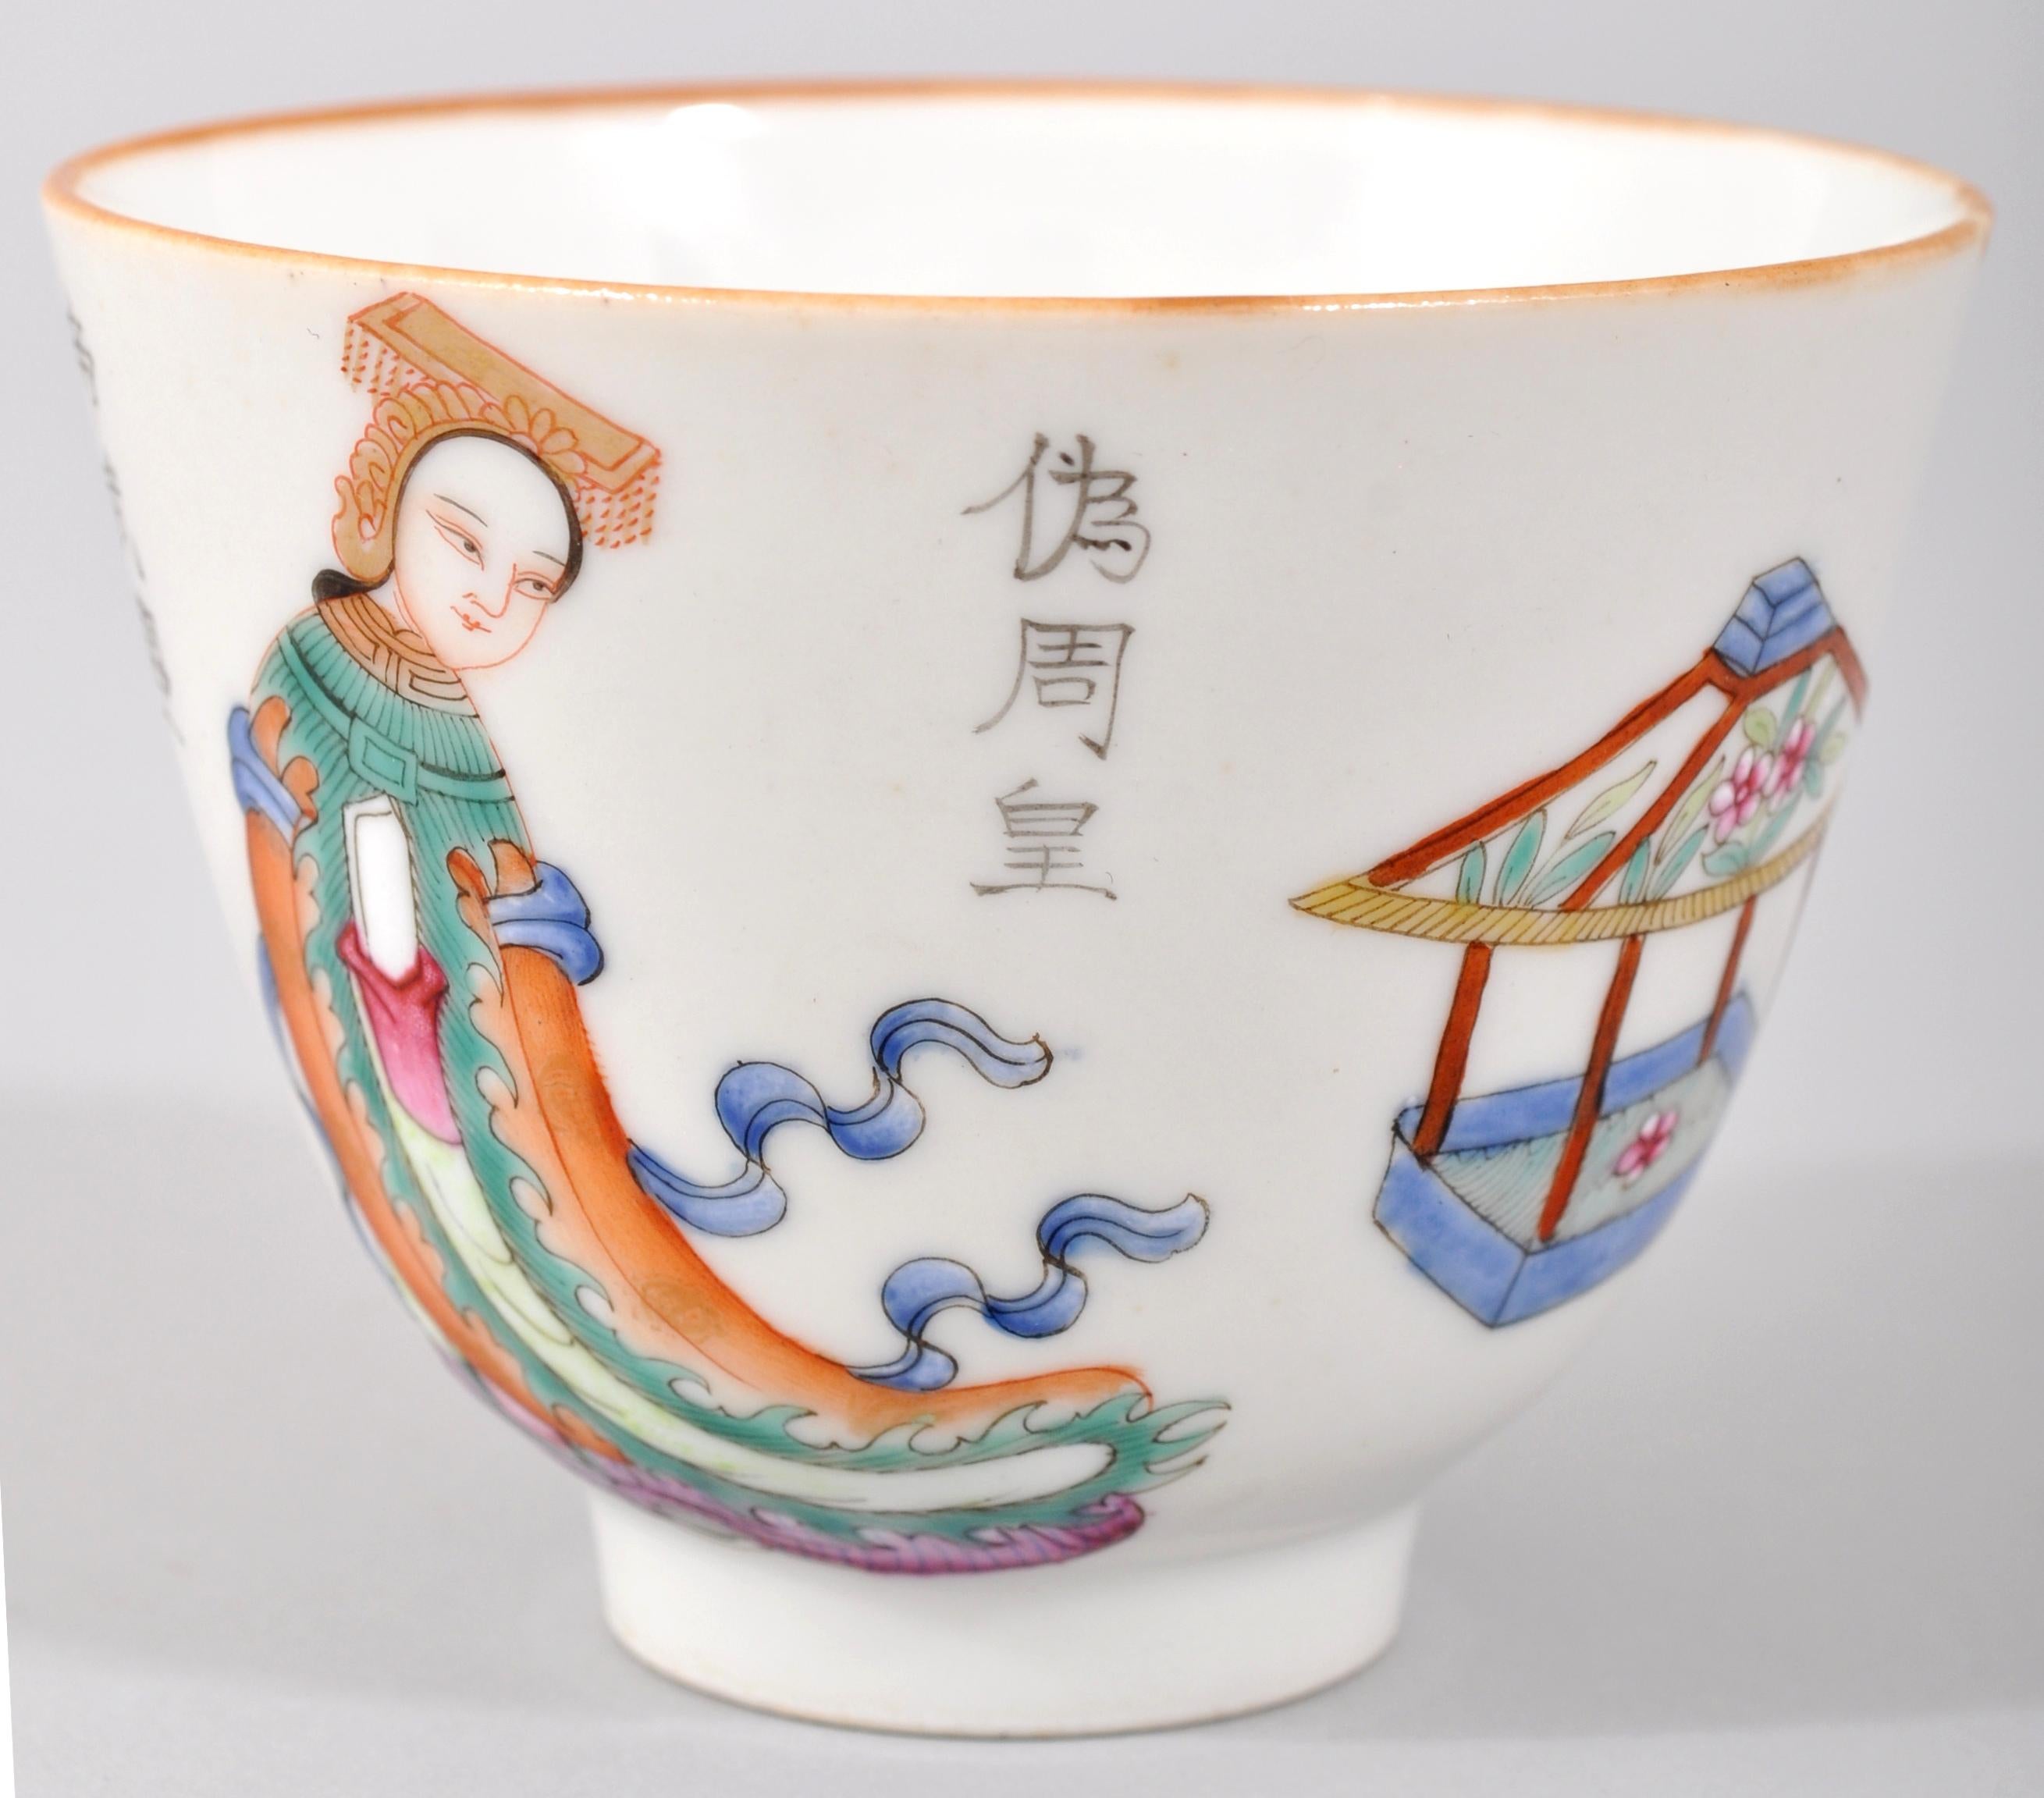 Antique 19th century Chinese Qing dynasty Famille rose porcelain bowl/cup with Daoguang Mark, circa 1880. The cup finely decorated with different panels, including an archer, an Imperial maiden, a garden pagoda, and a stylized coin. The bowl also